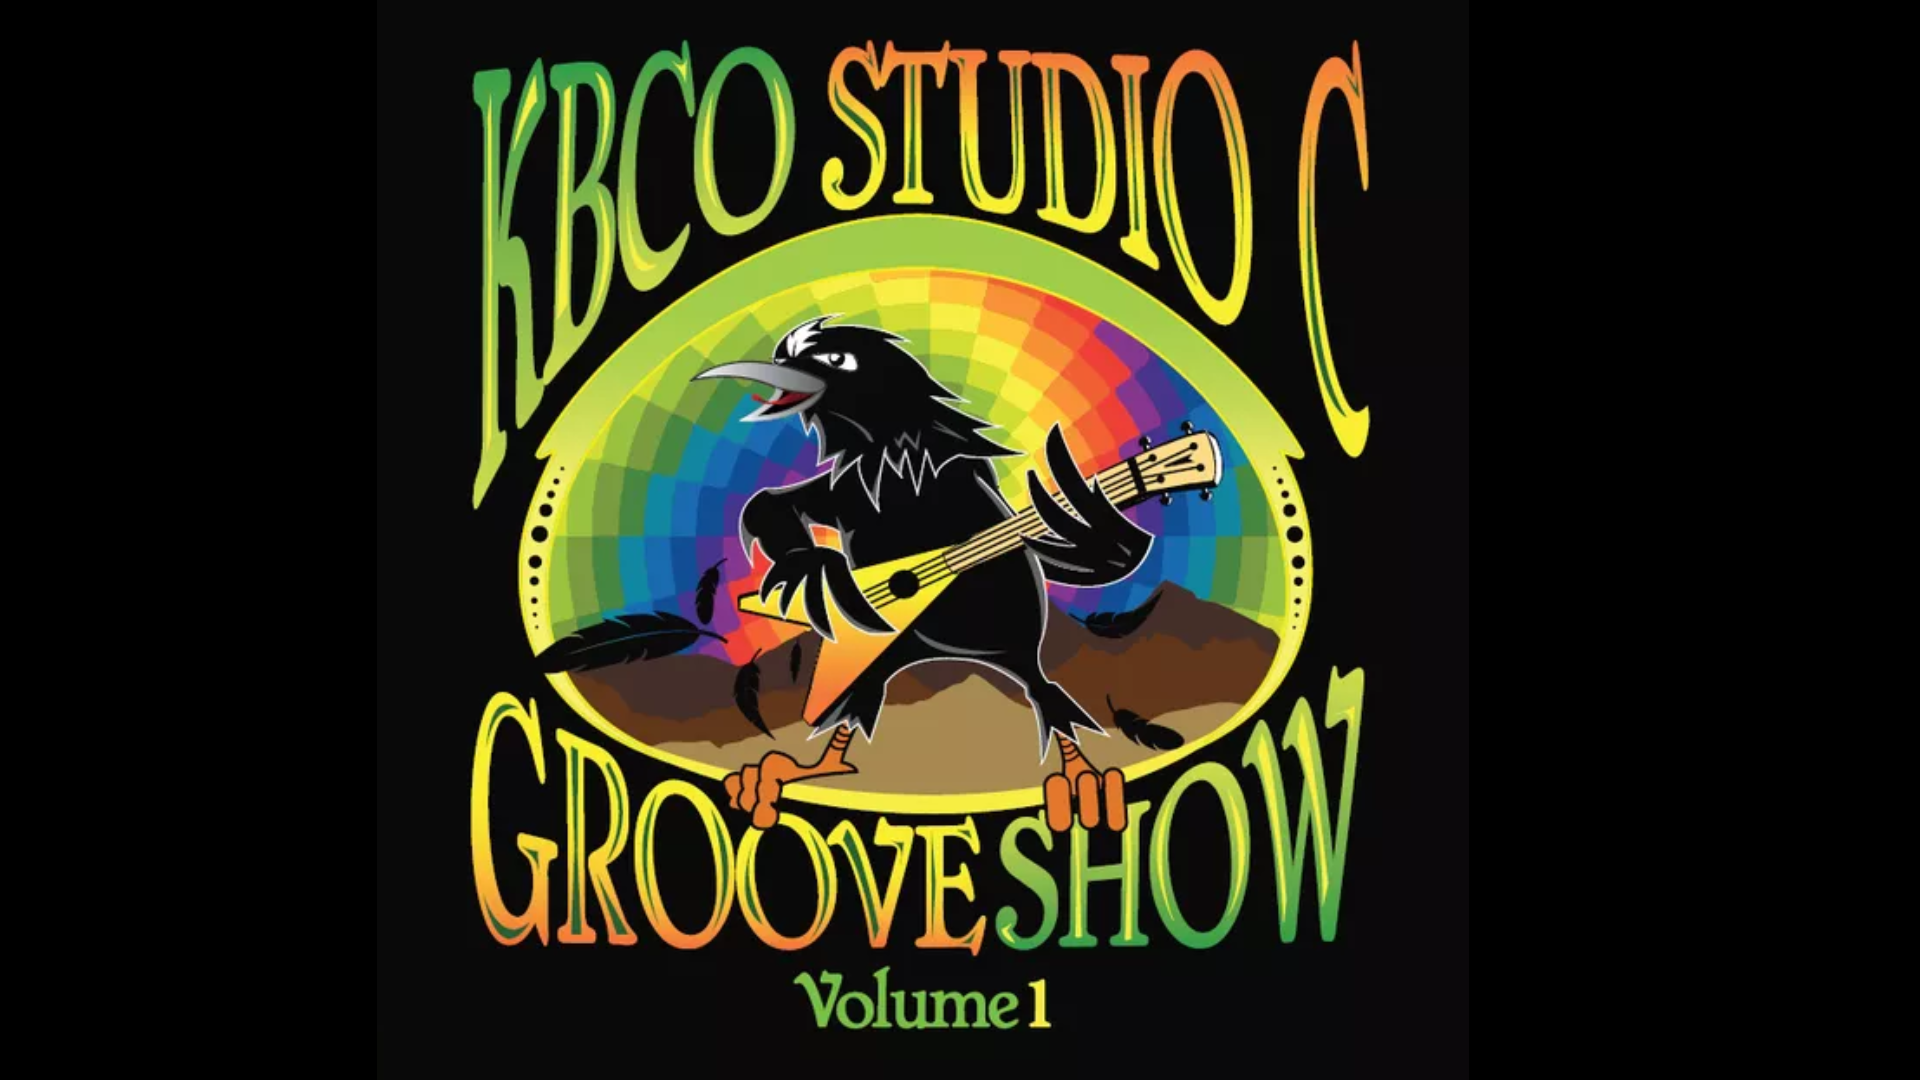 Marcus King Band and Widespread Panic are two of the bands on the new vinyl from KBCO Studio C called 'Groove Show Vol 1.' The album goes on sale Sat., April 12, 2019 at Twist and Shout.